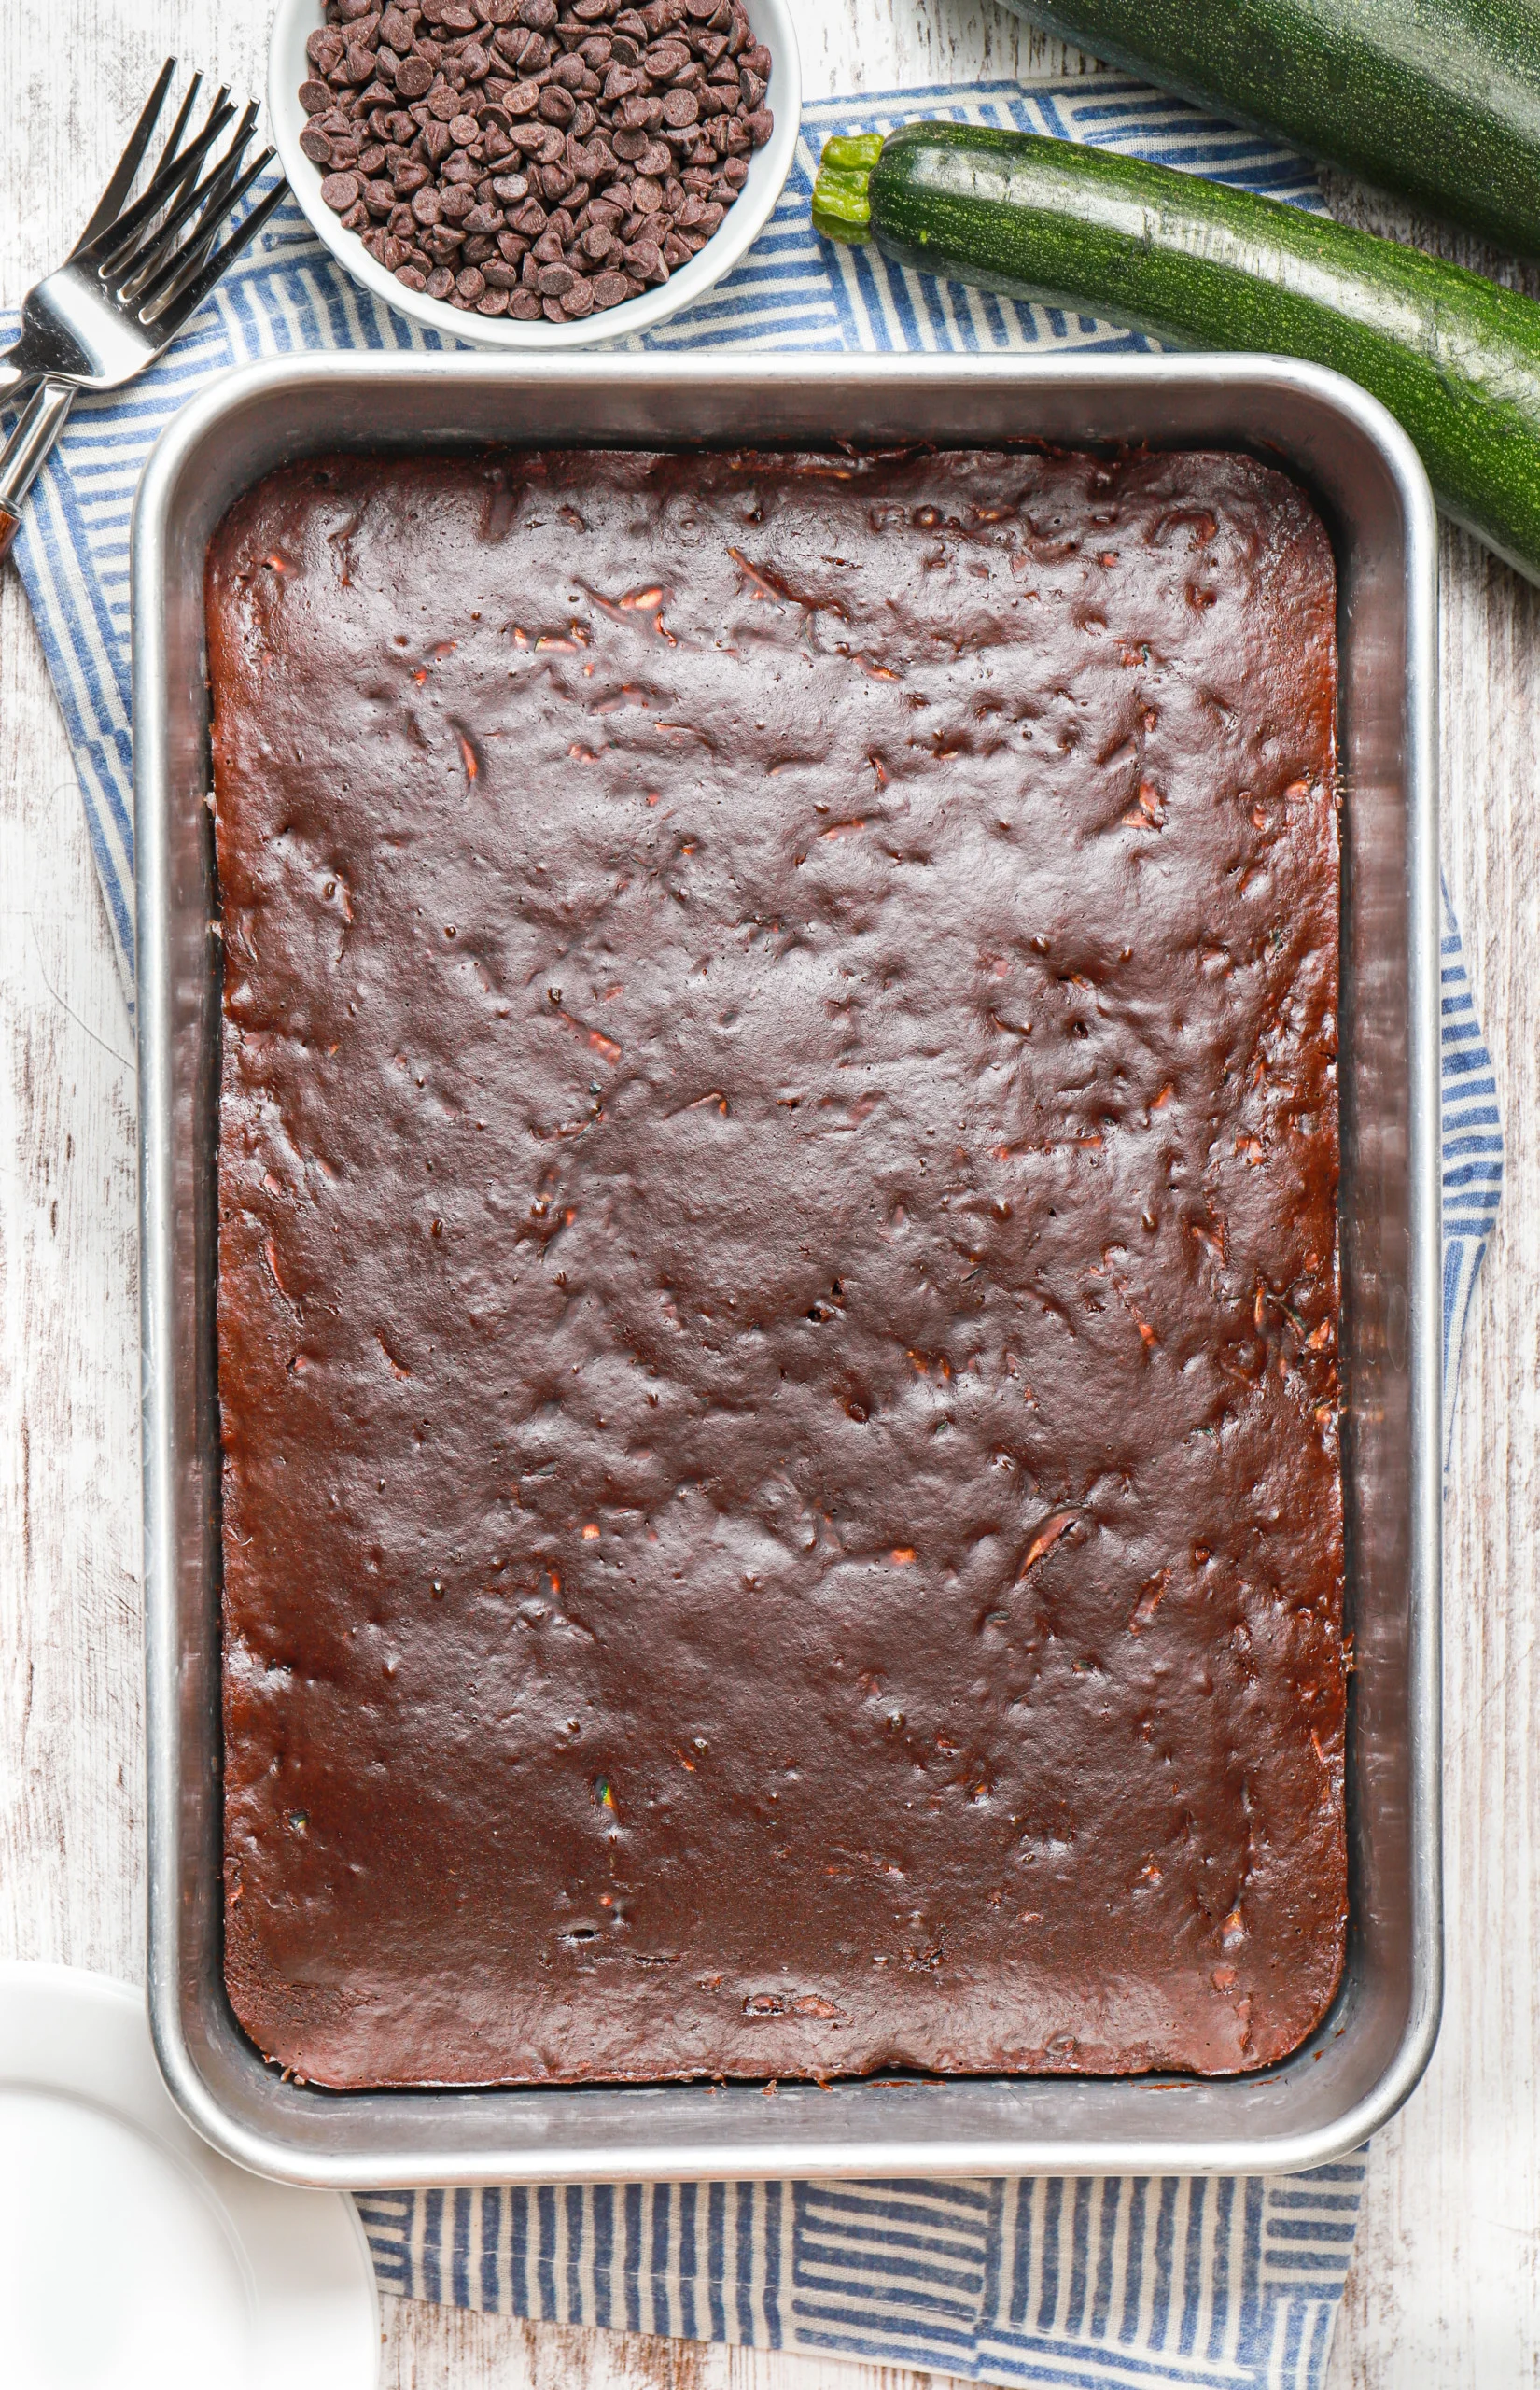 Overhead view of a batch of chocolate zucchini bars in an aluminum baking dish before chocolate frosting is added.